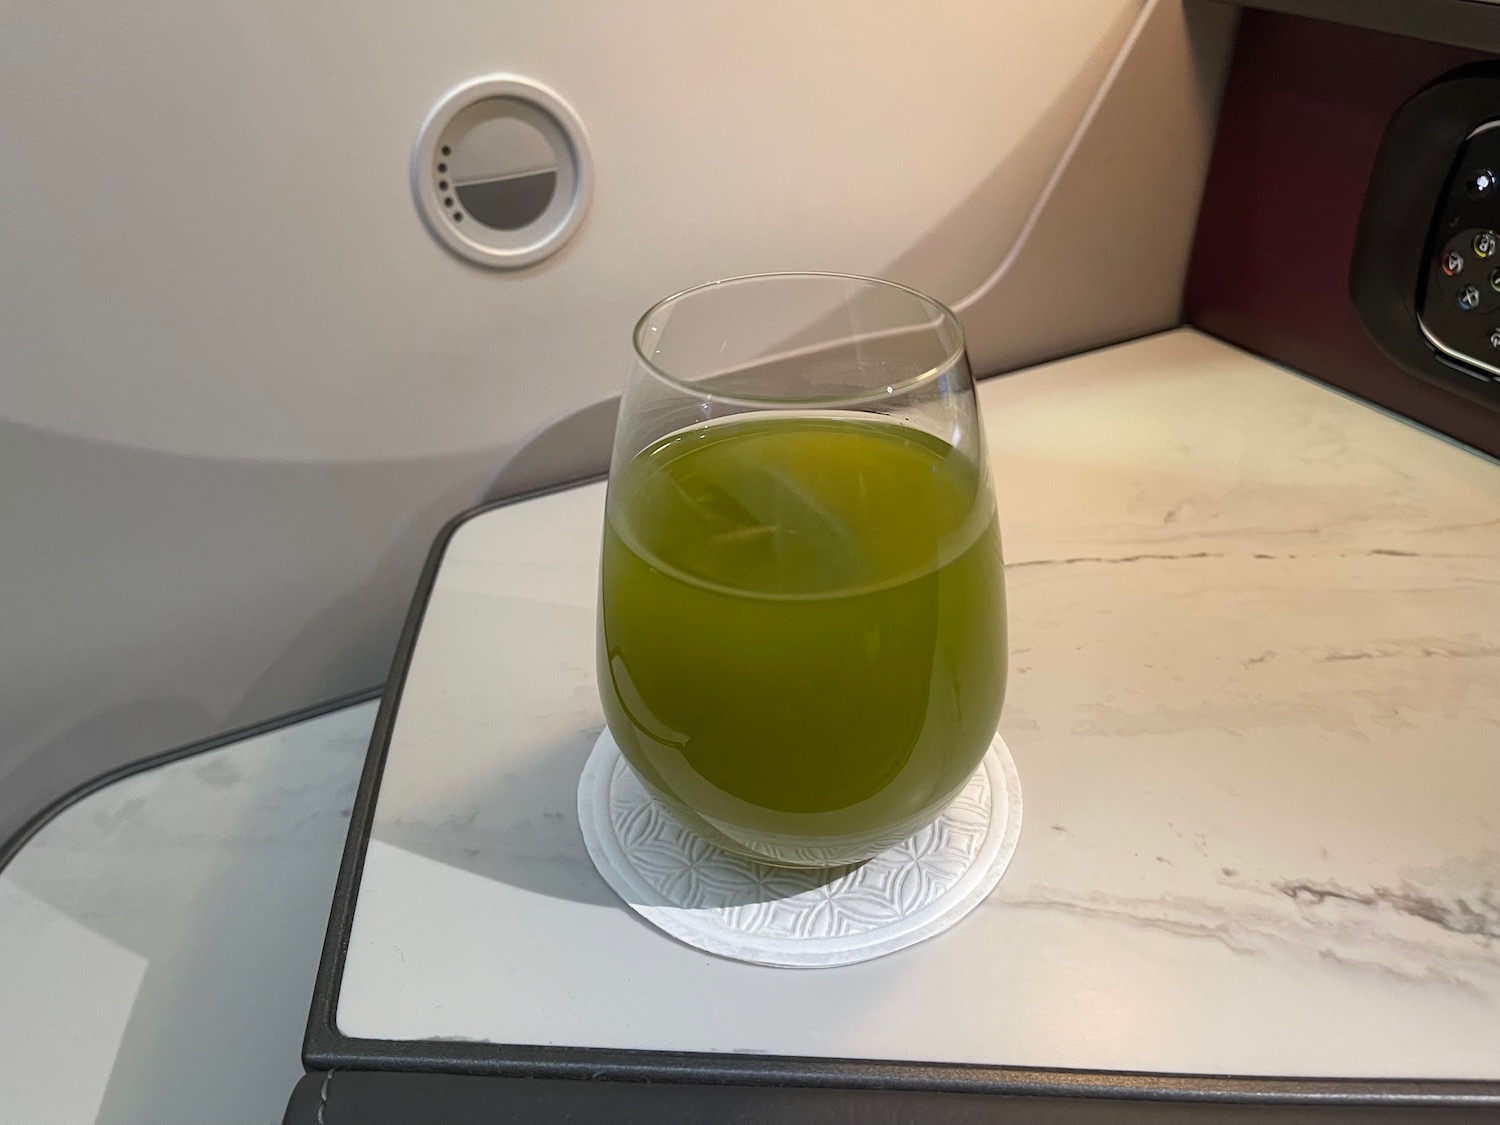 a glass of green liquid on a coaster